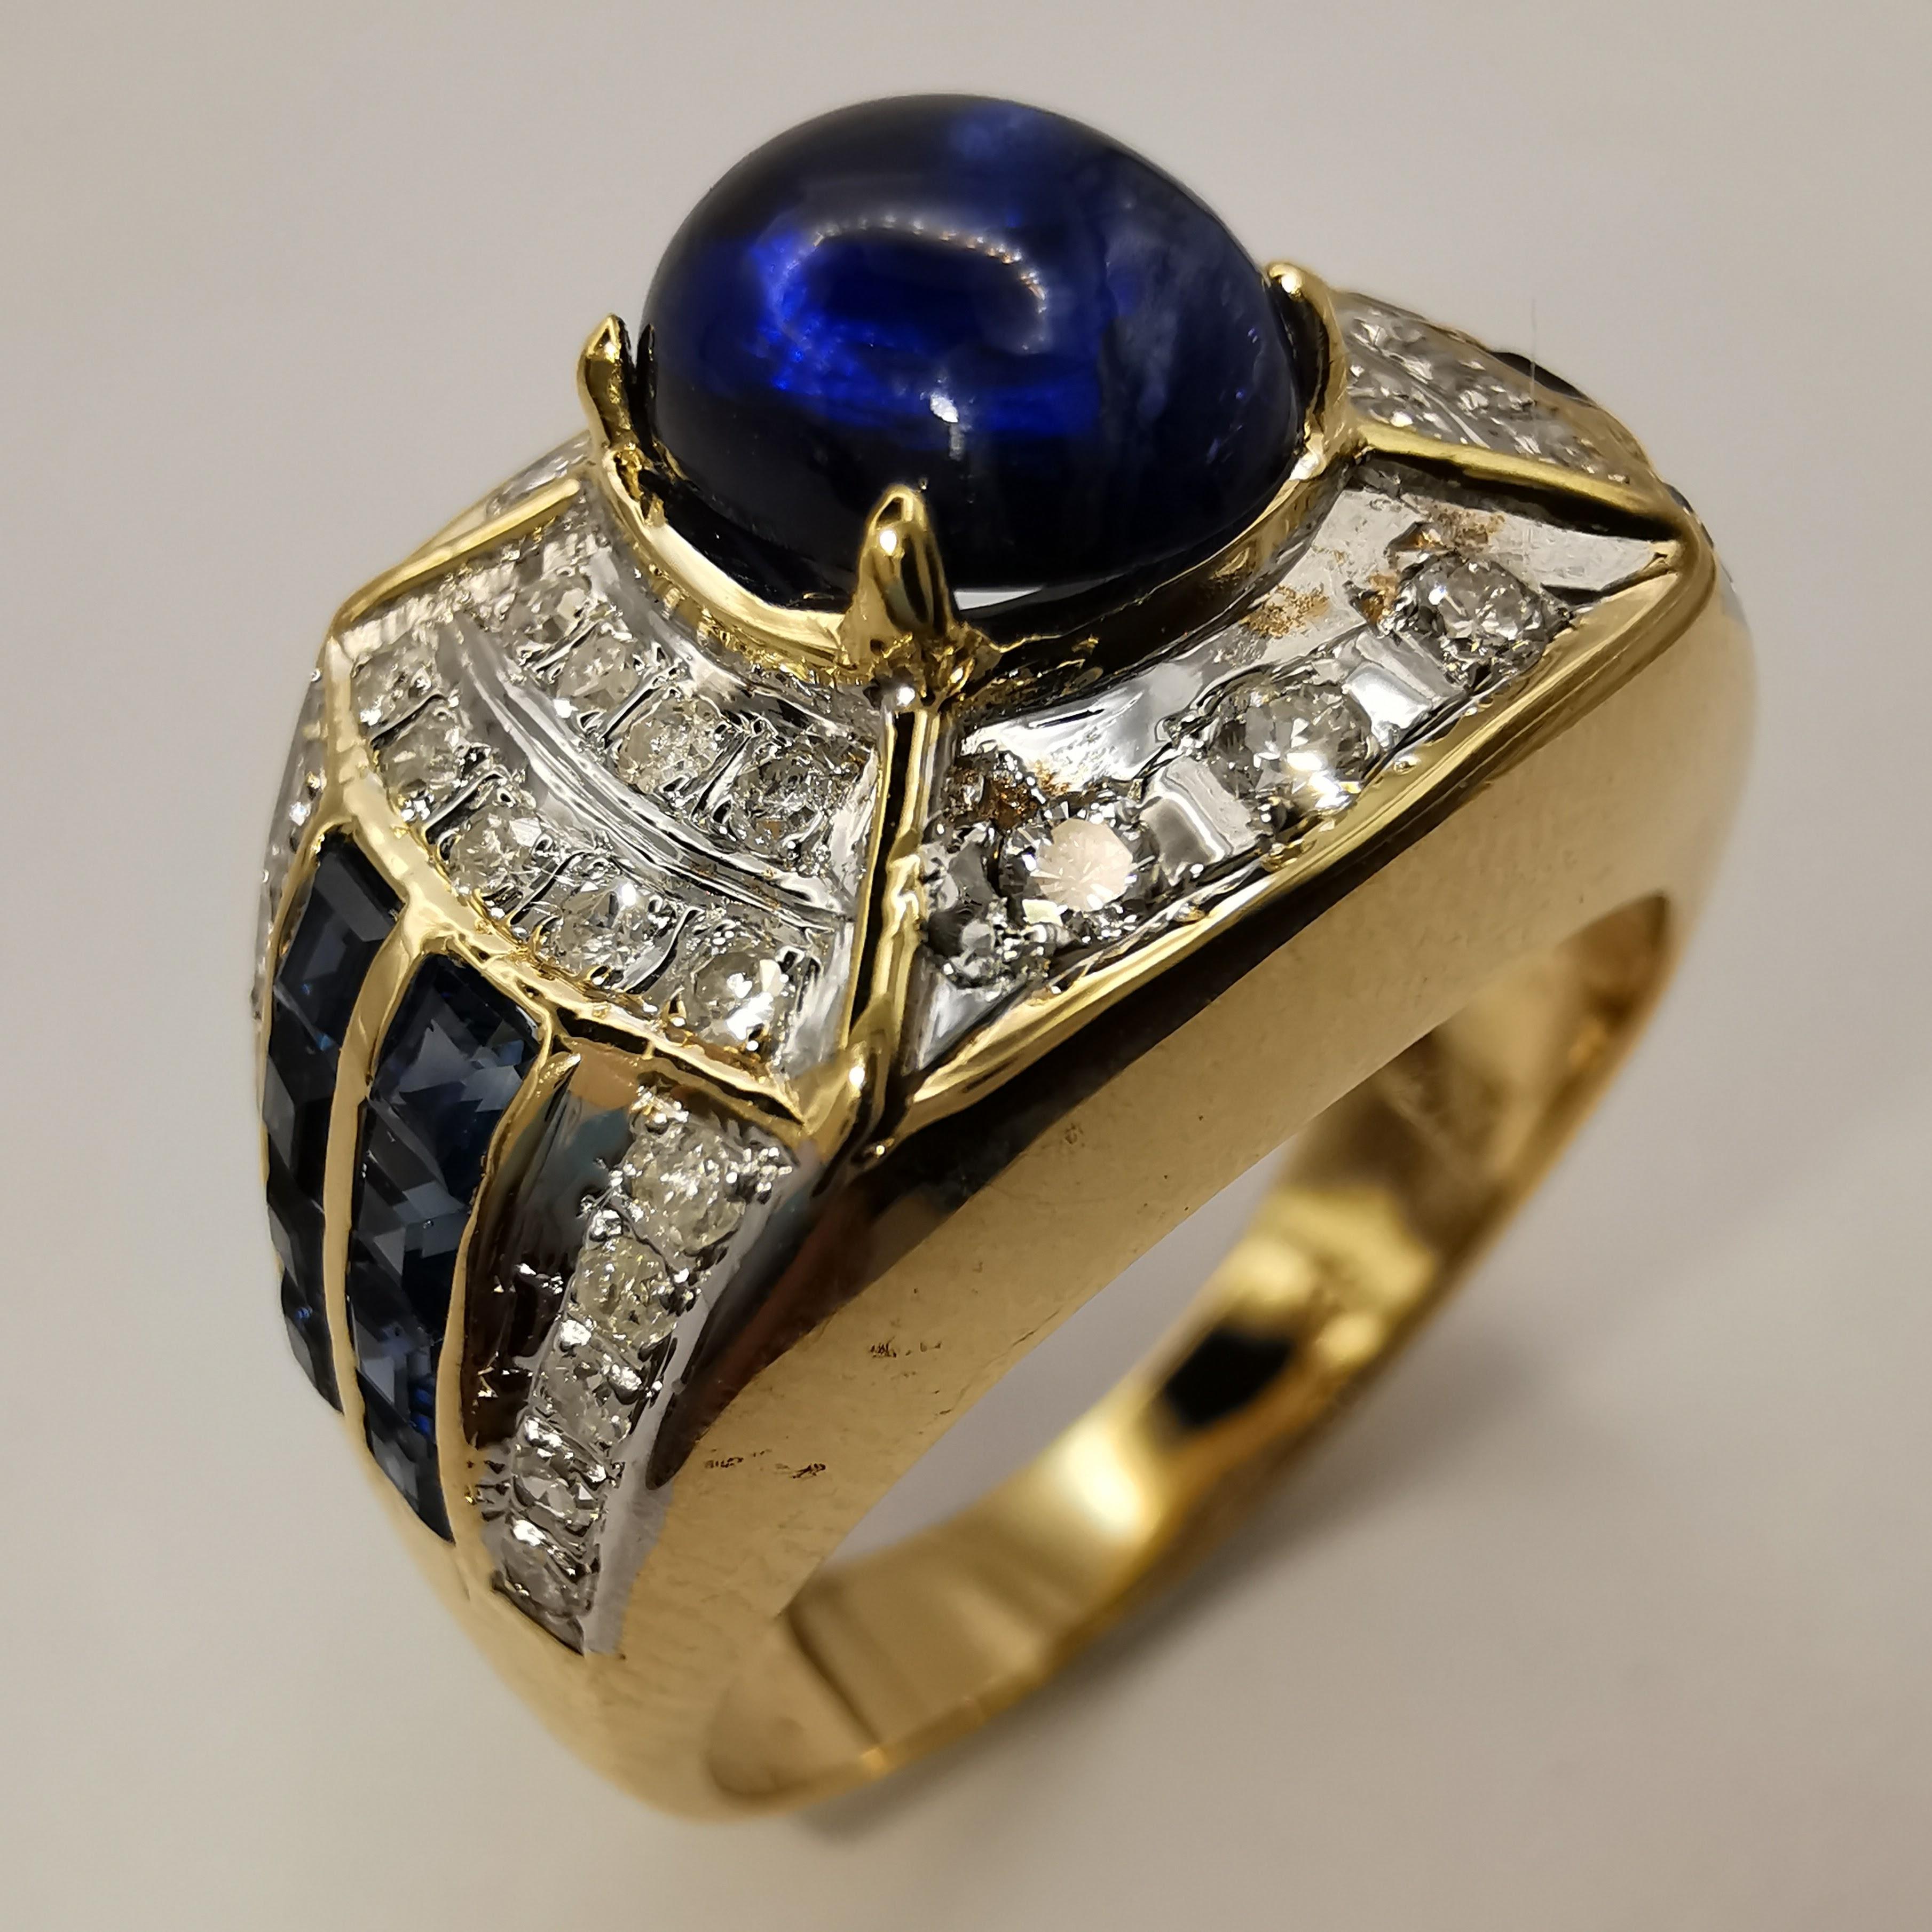 Introducing our exquisite 2.11ct Oval Cabochon Royal Blue Sapphire Diamond Art Deco Men's Ring in 14K Gold. This magnificent ring is the epitome of luxury and sophistication, featuring a stunning oval cabochon cut royal blue sapphire at its center.